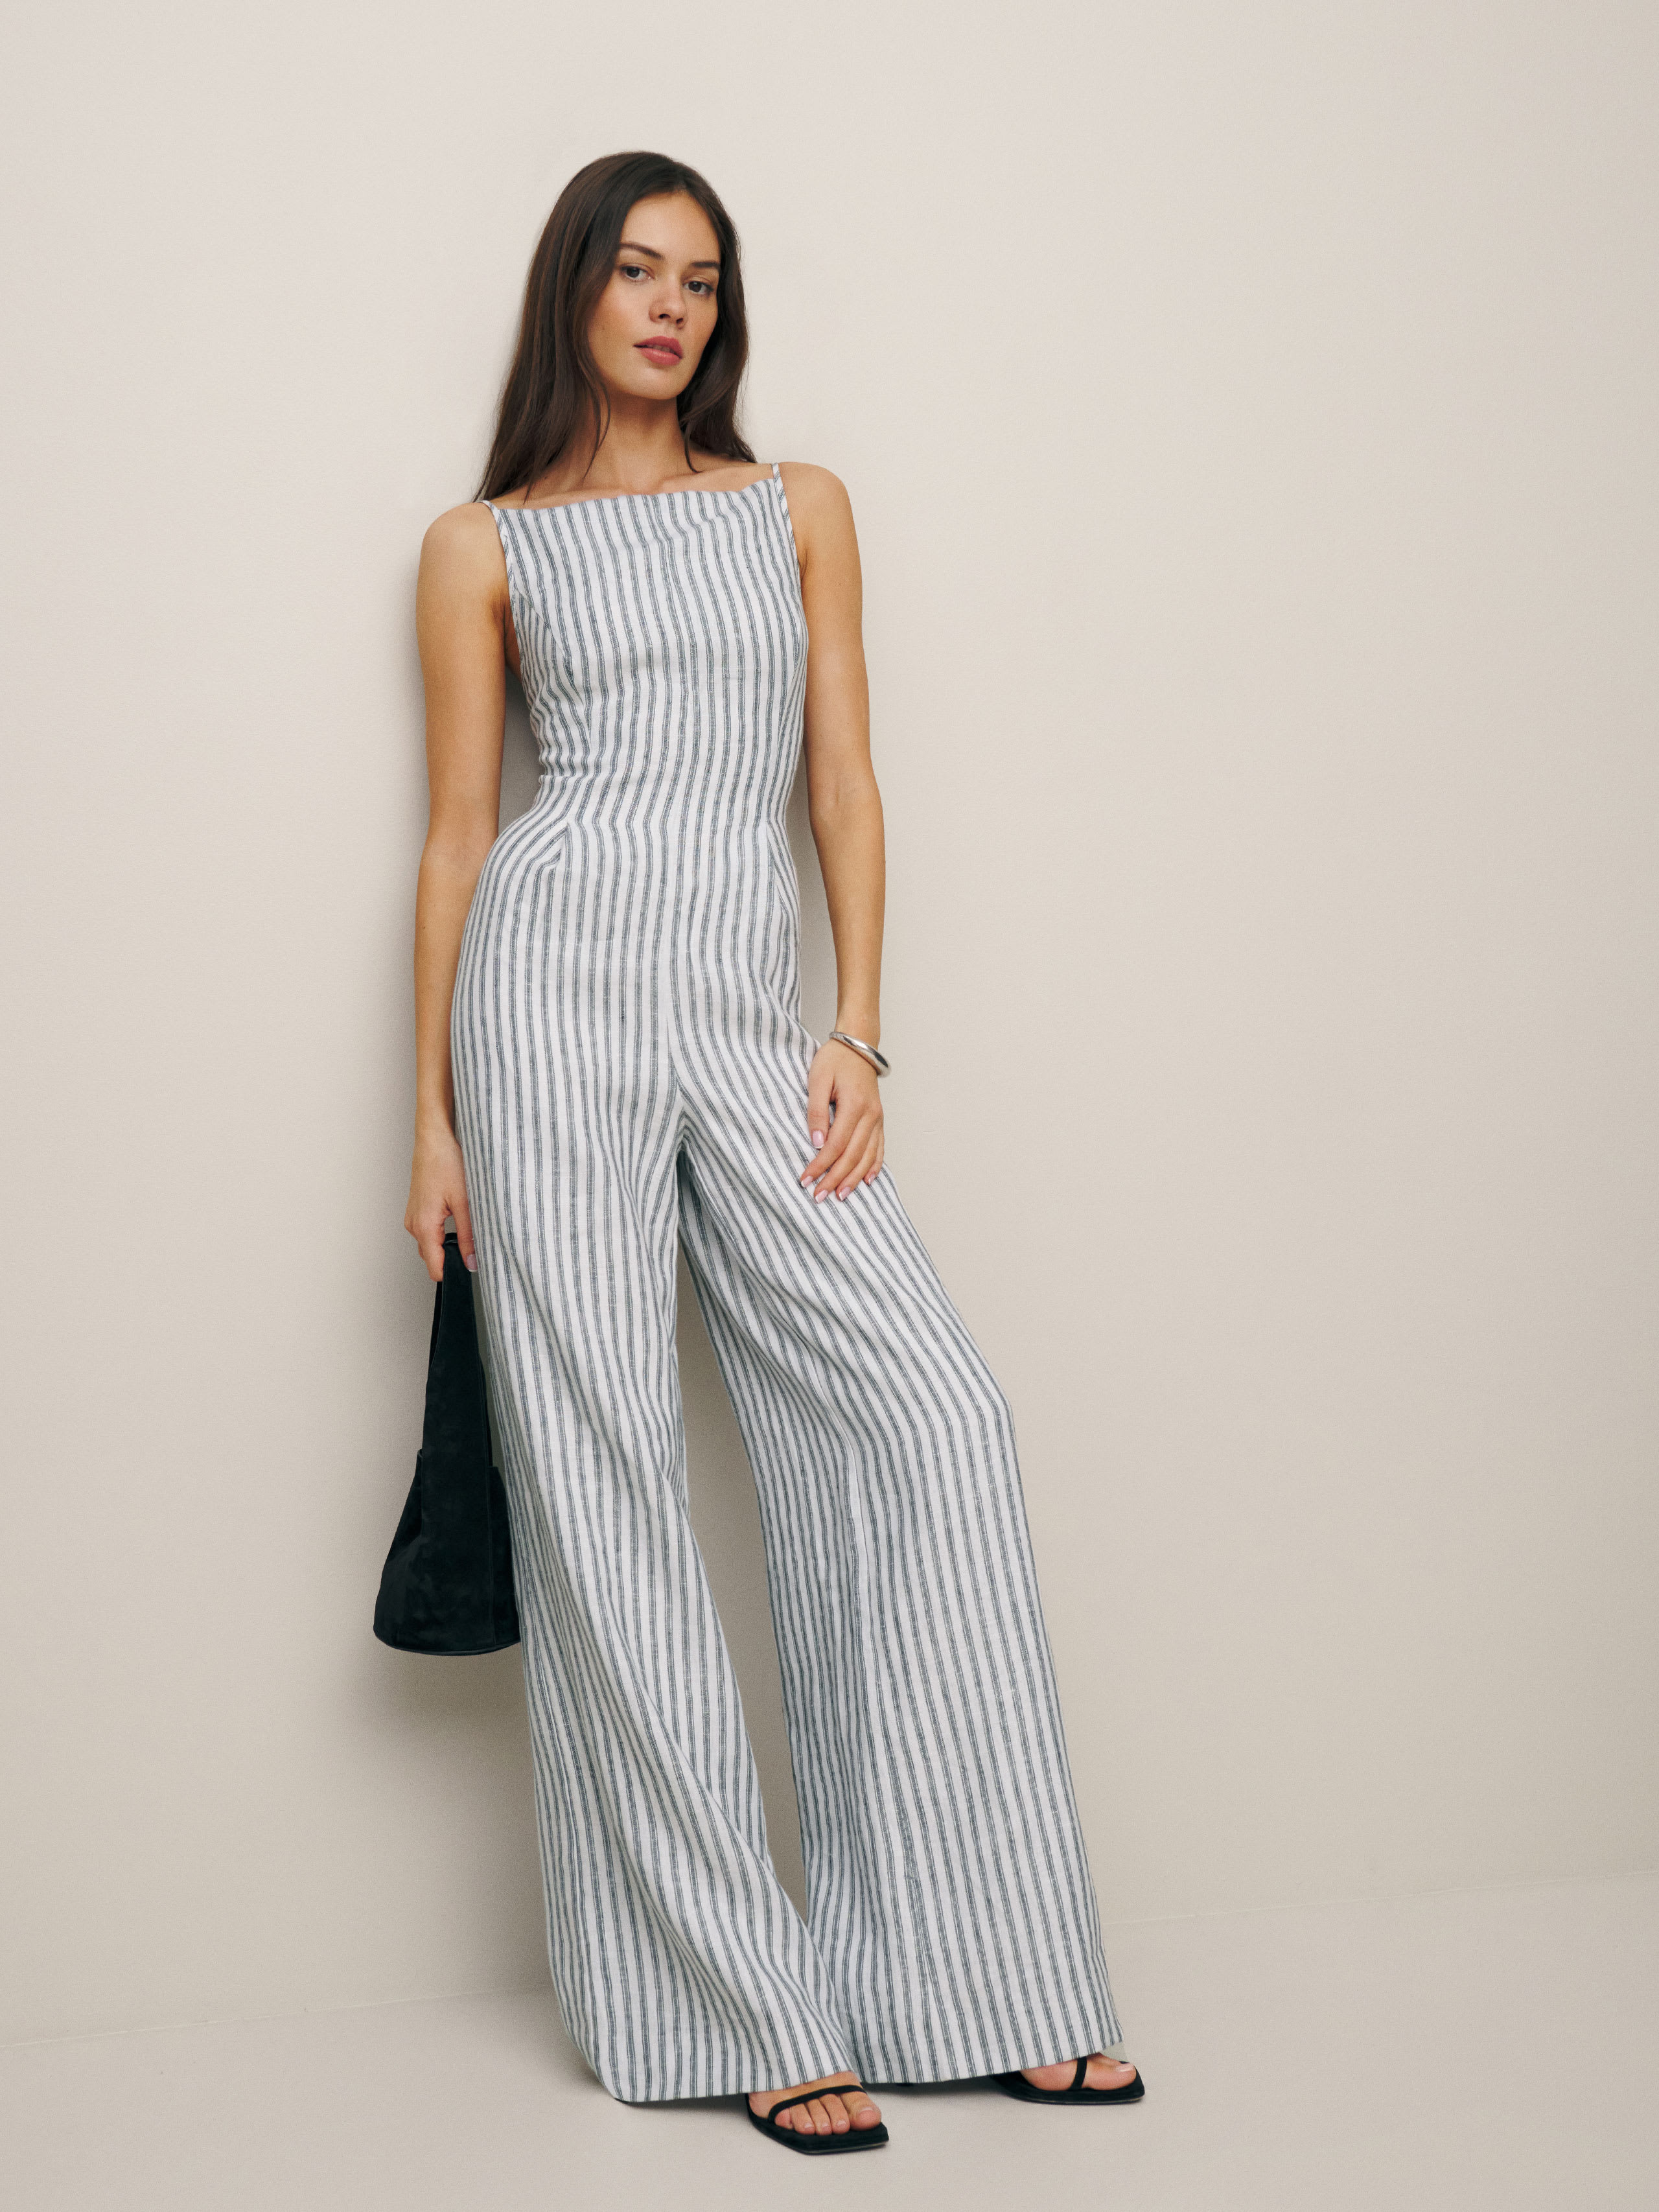 Reformation Ciara Linen Jumpsuit In Antibes Stripe